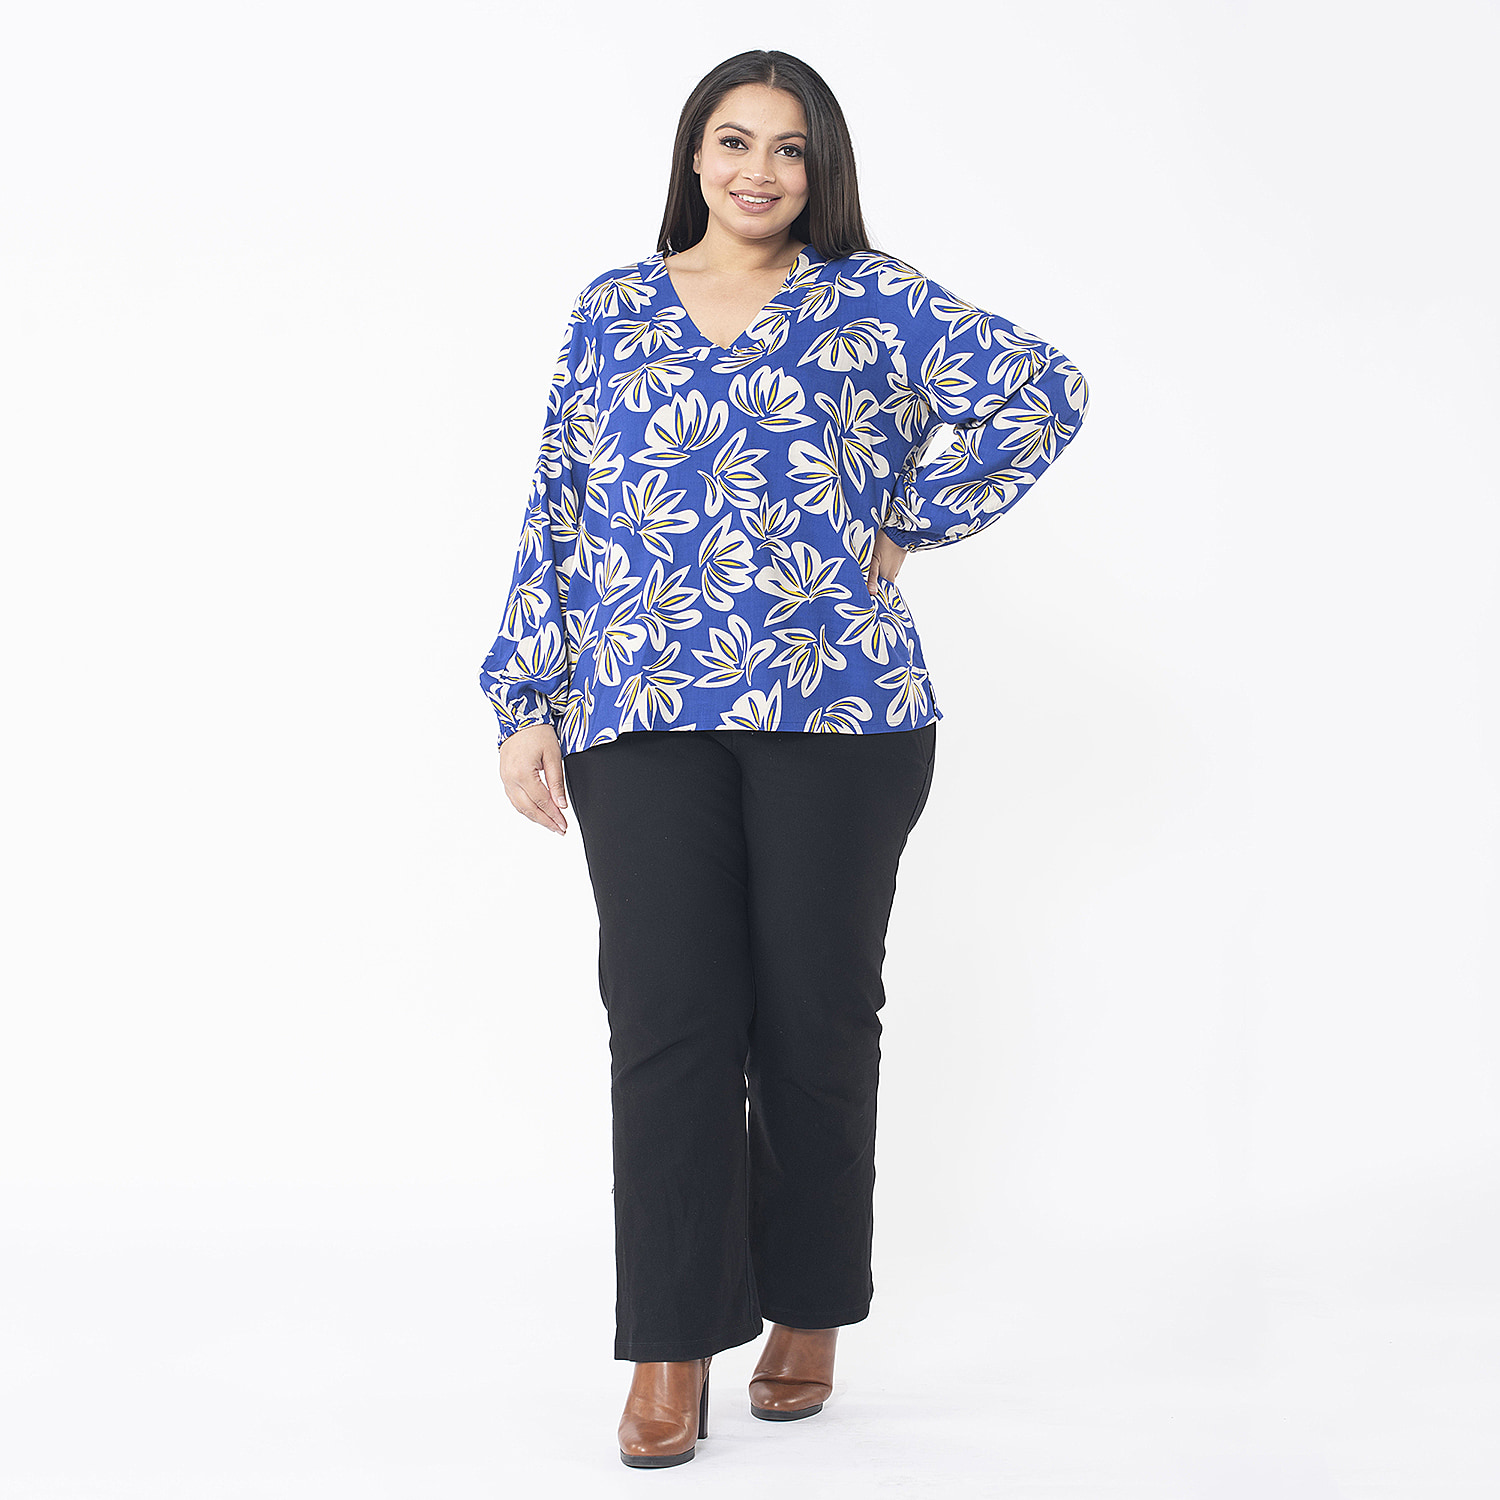 TAMSY 100% Viscose Floral Printed V Neck Full Sleeve Top with Elastic at Cuffs (Size XL,20-22) - Navy